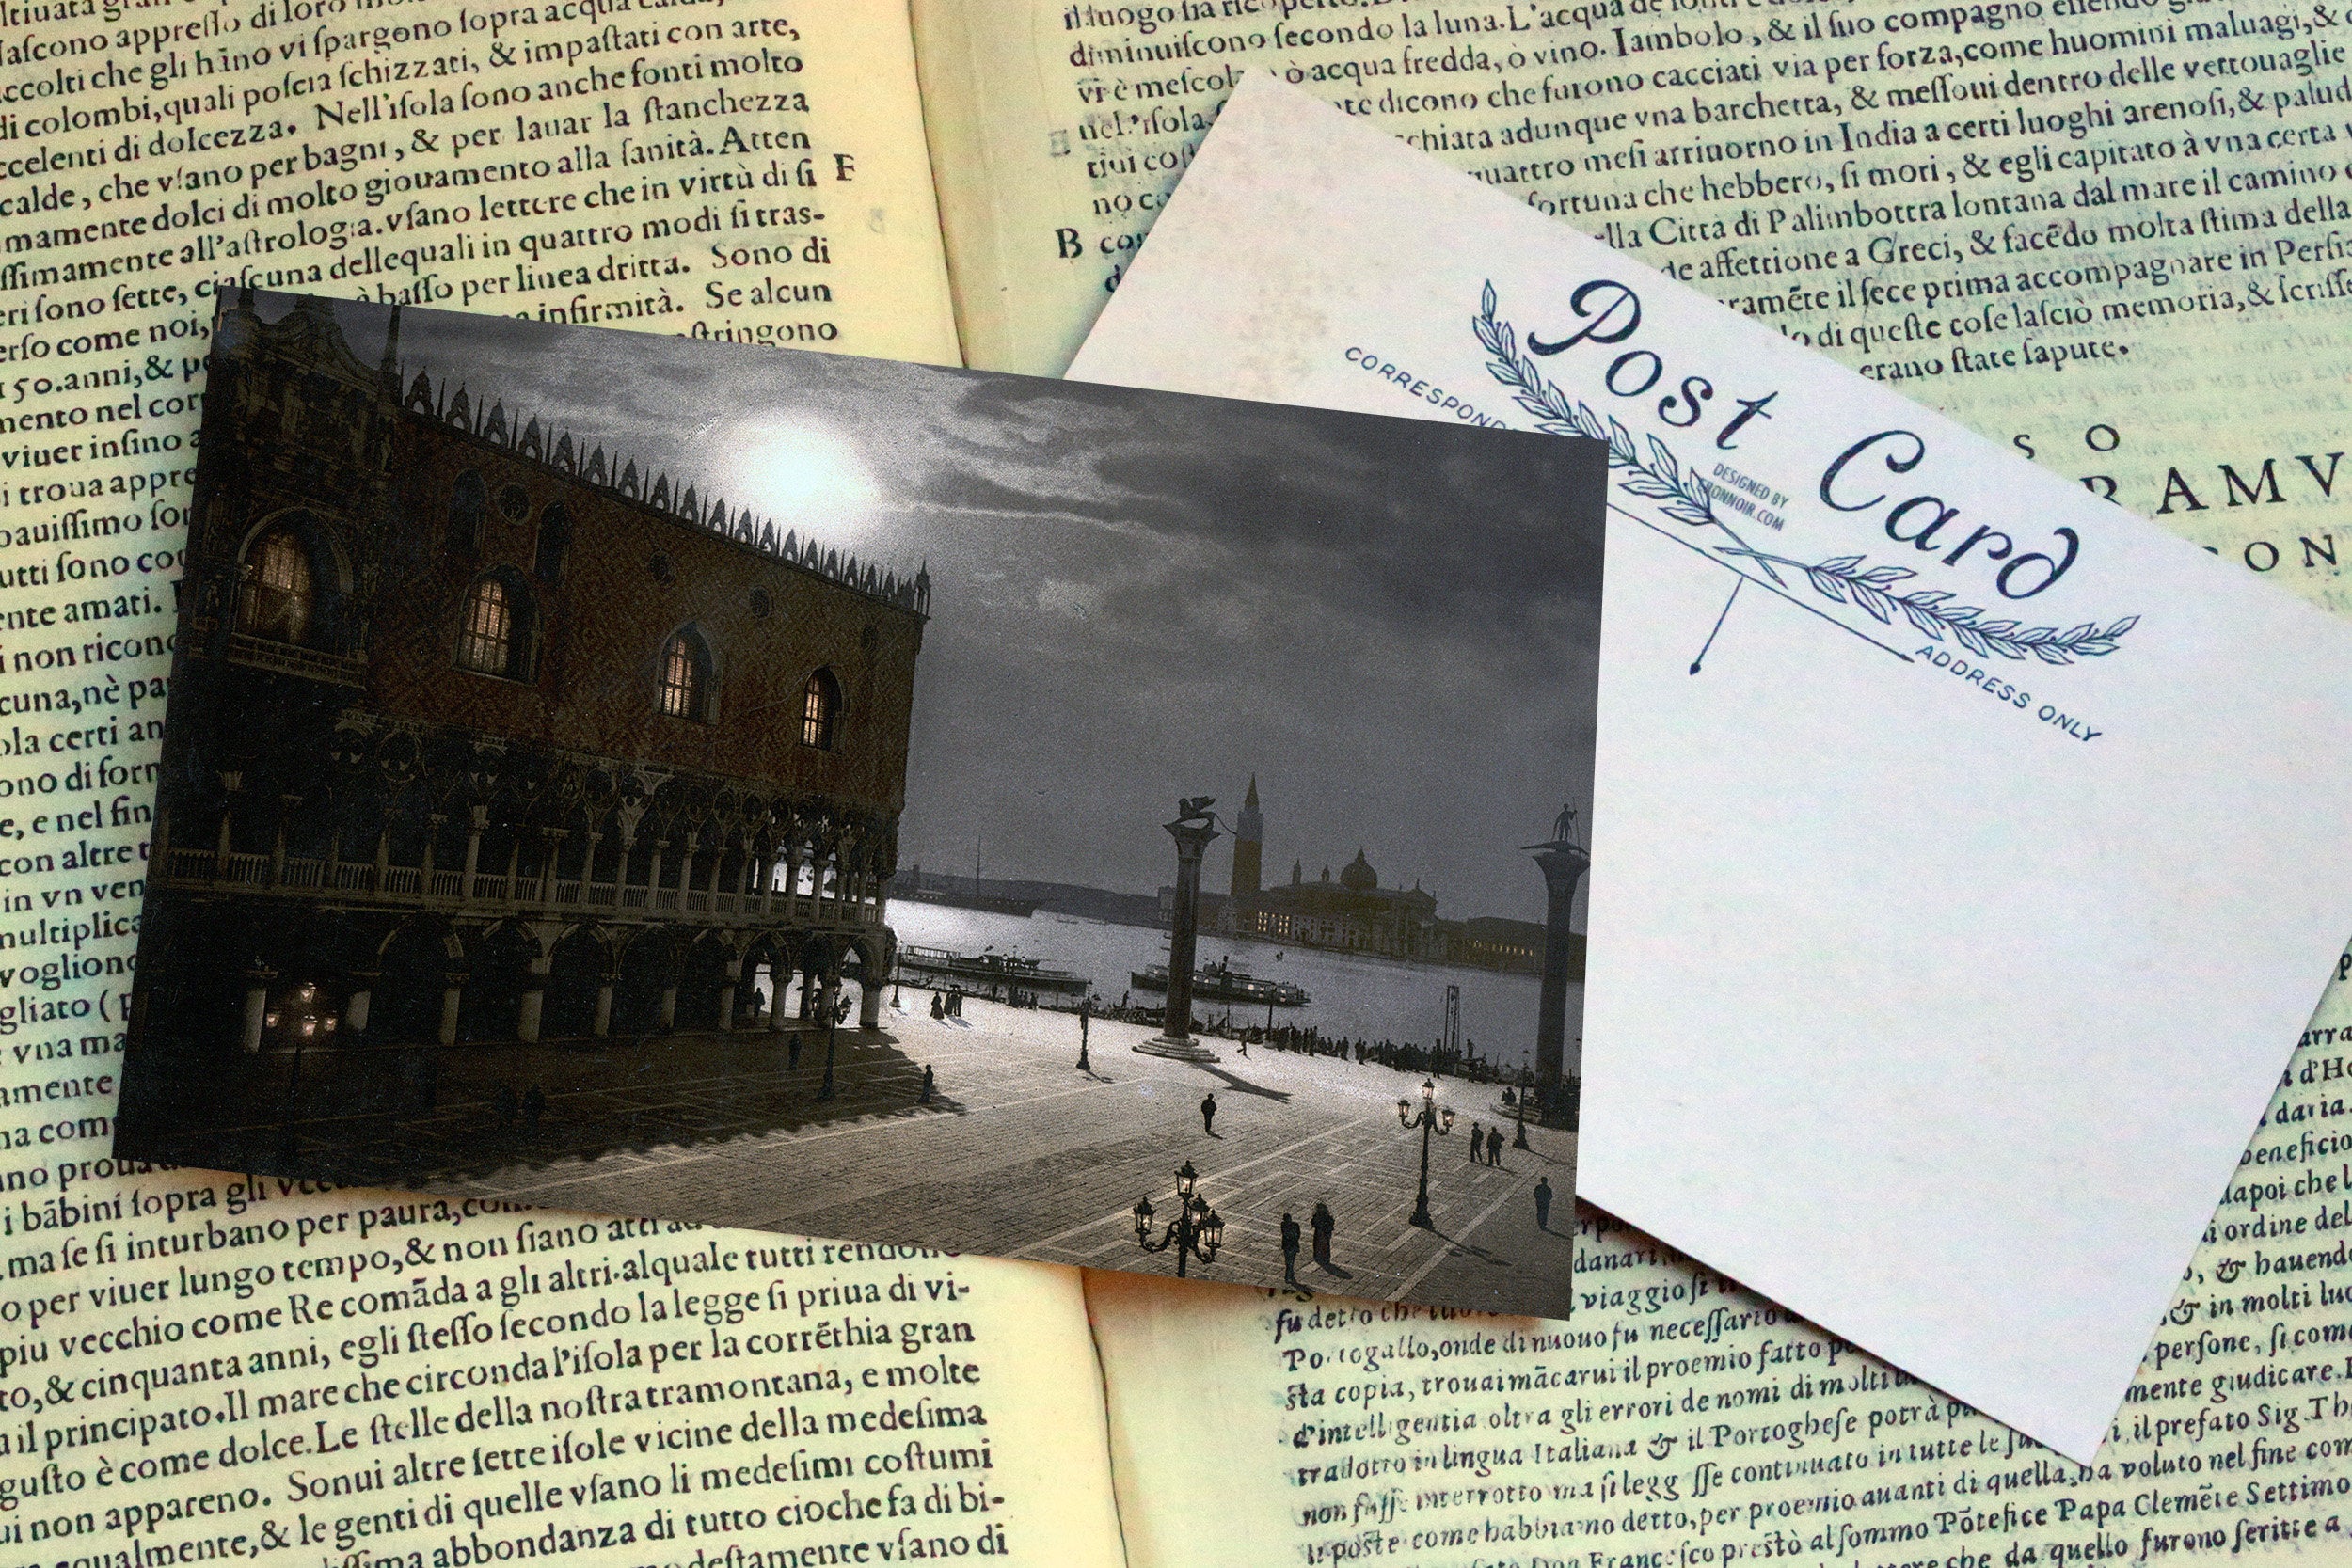 Venice by Moonlight Postcard/Greeting Card Set, Exclusively Designed, 4 Designs, 12 Cards